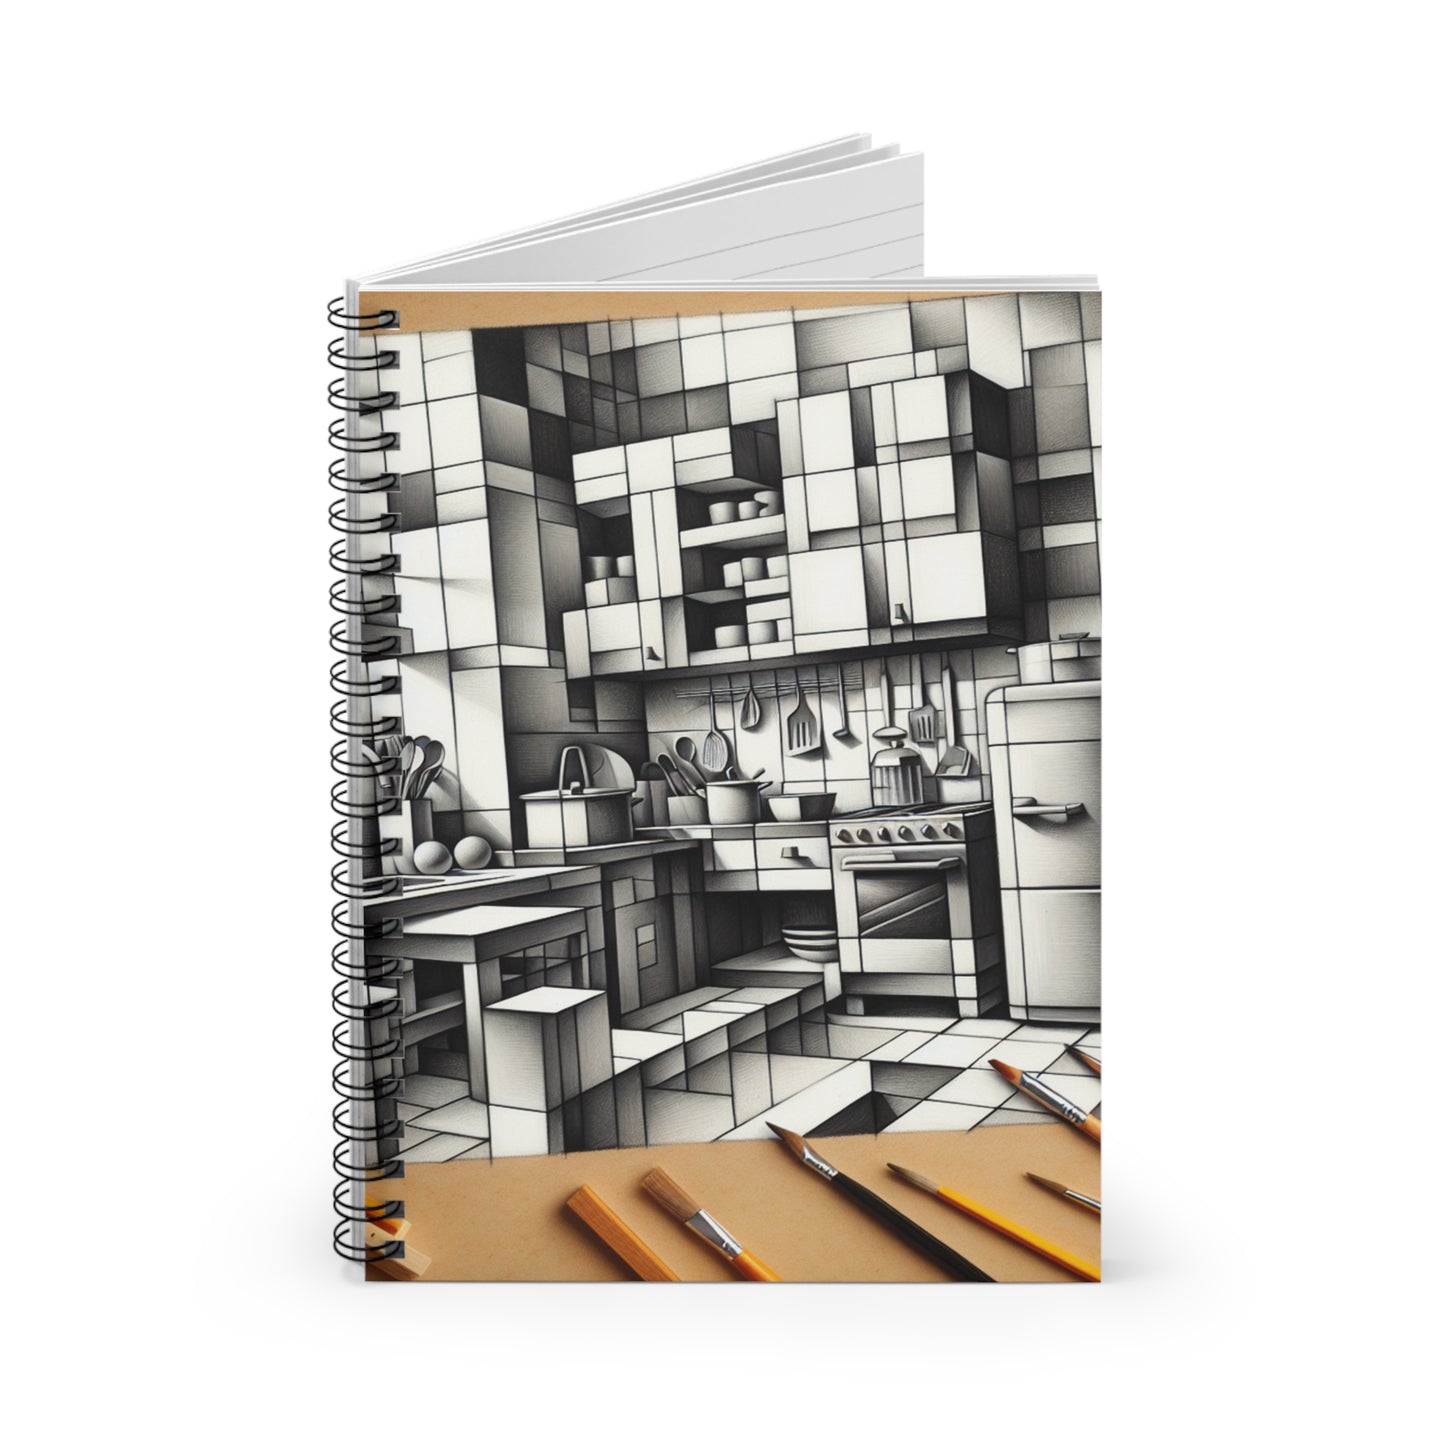 "Cubist Kitchen Collage" - The Alien Spiral Notebook (Ruled Line) Cubism Style